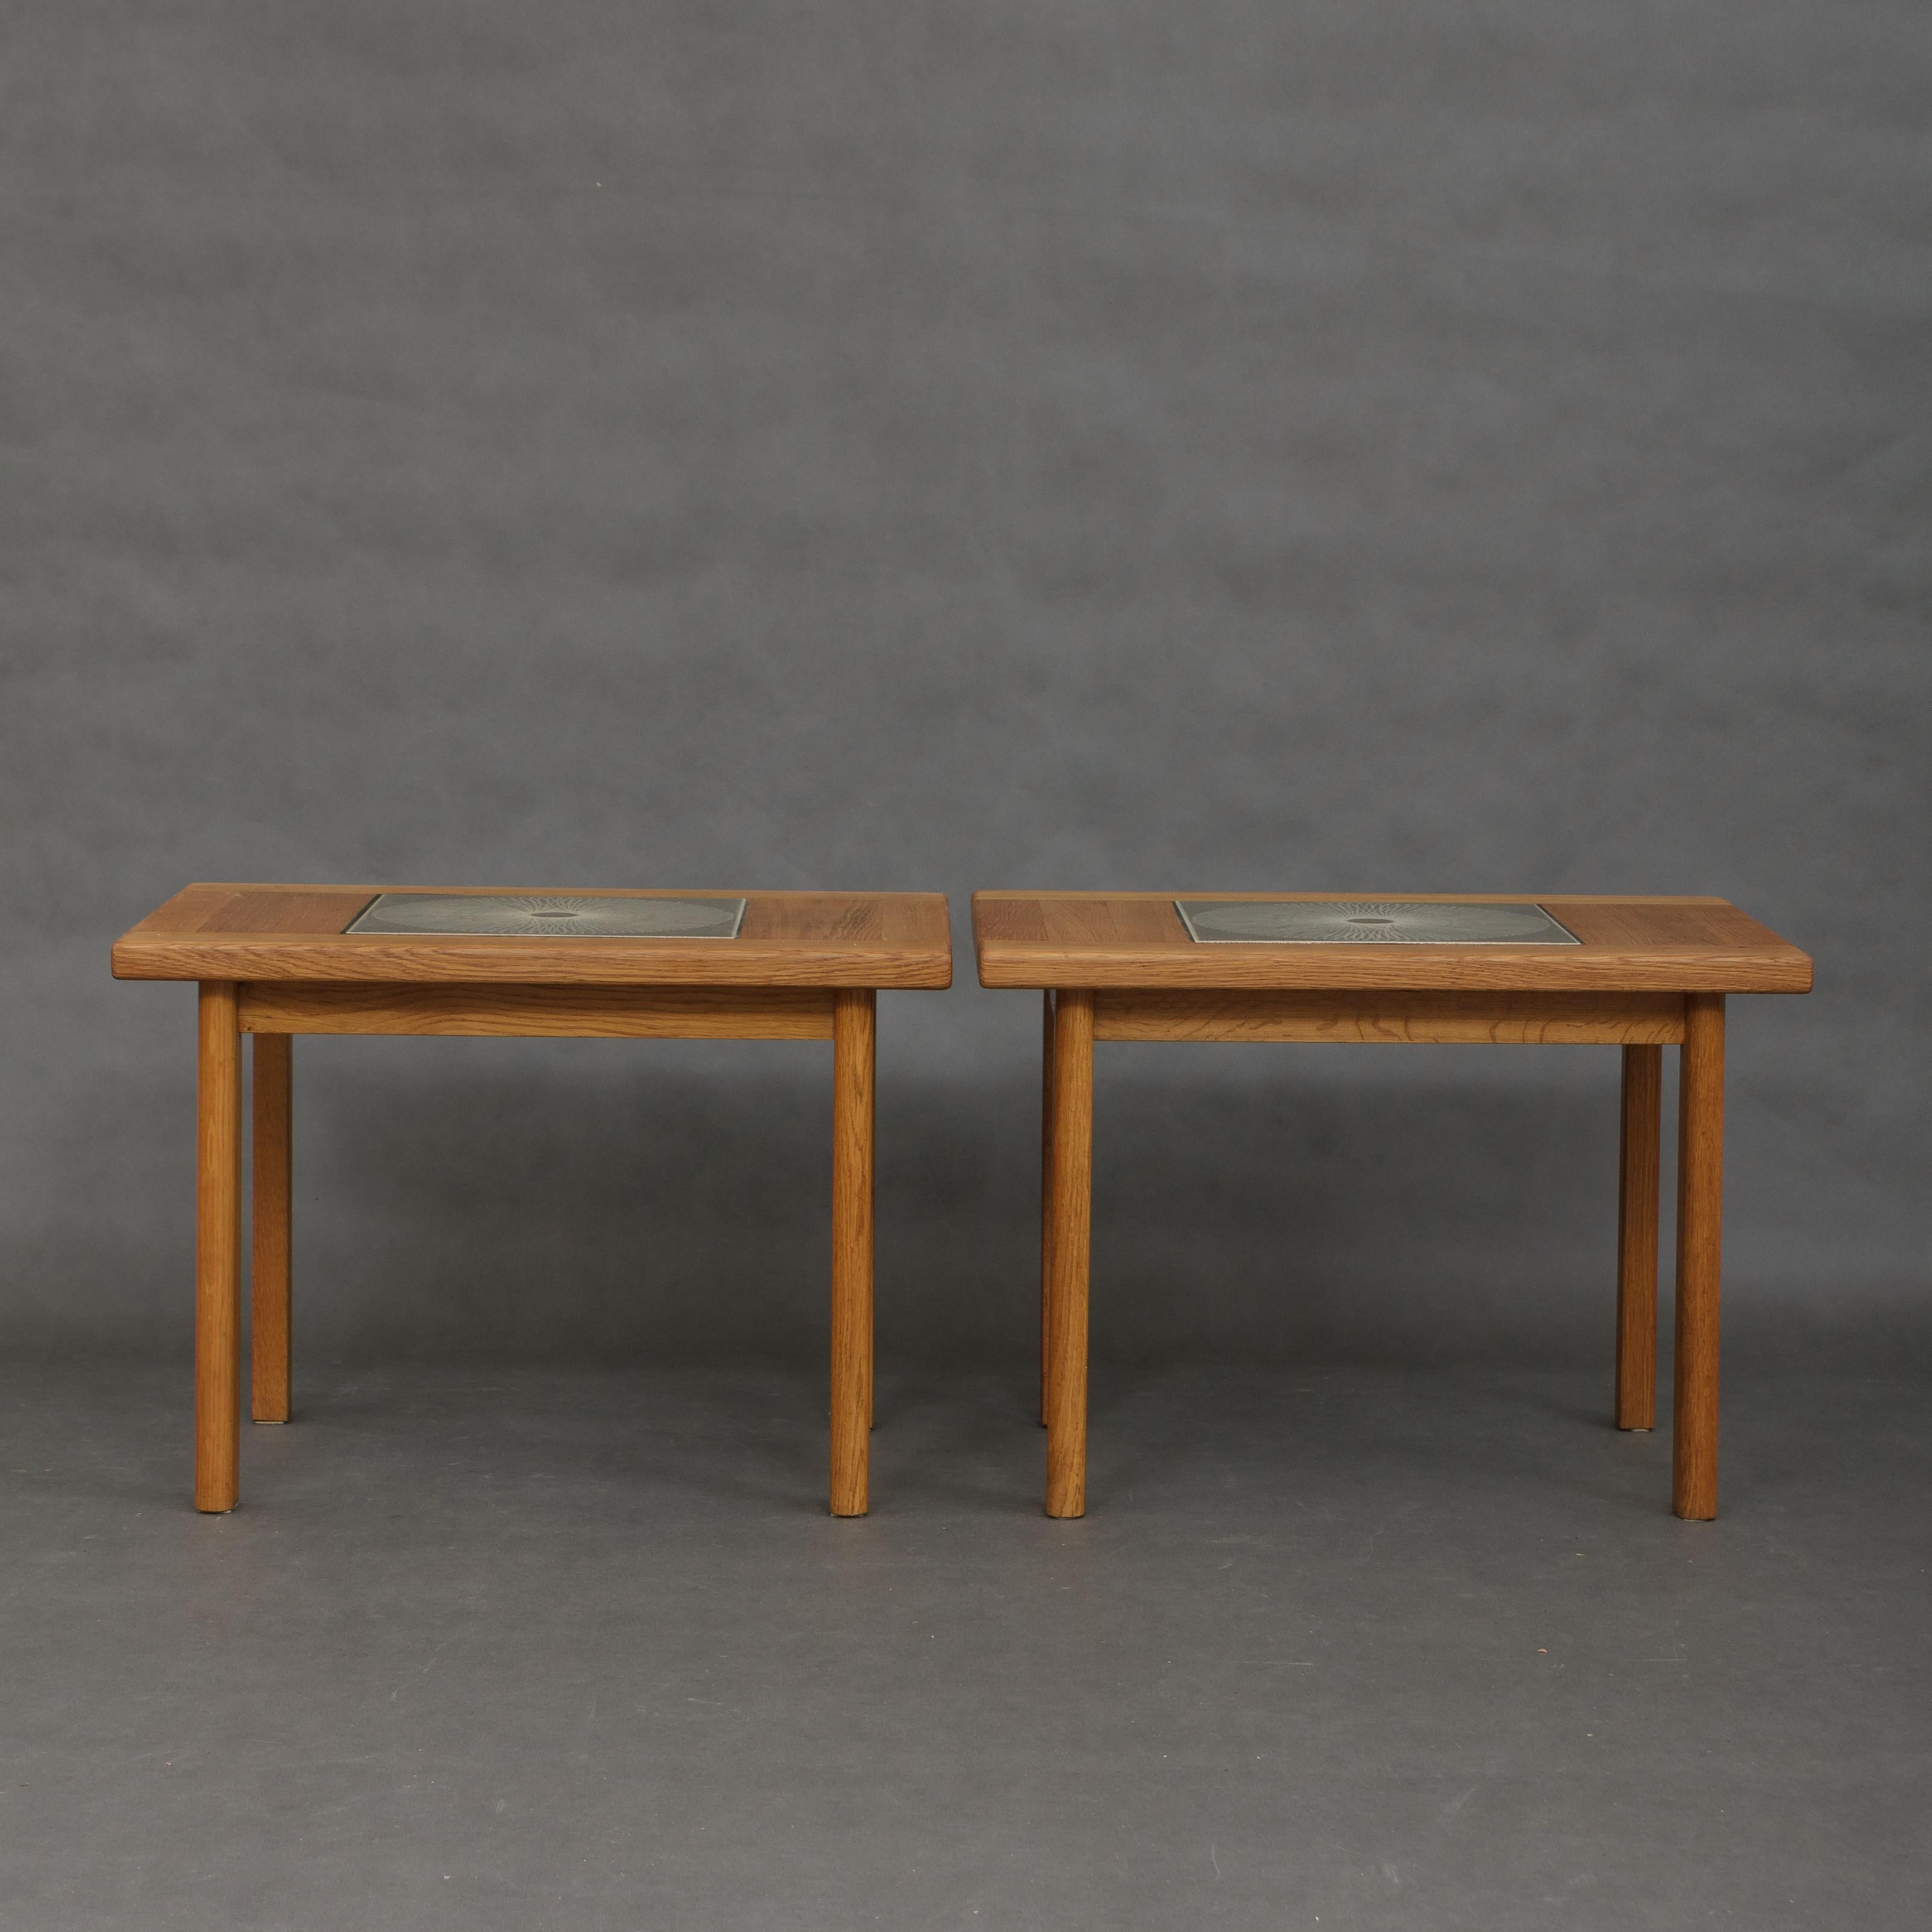 Late 20th Century Pair of Midcentury Oak Side Tables Attributed to Tue Poulsen For Sale